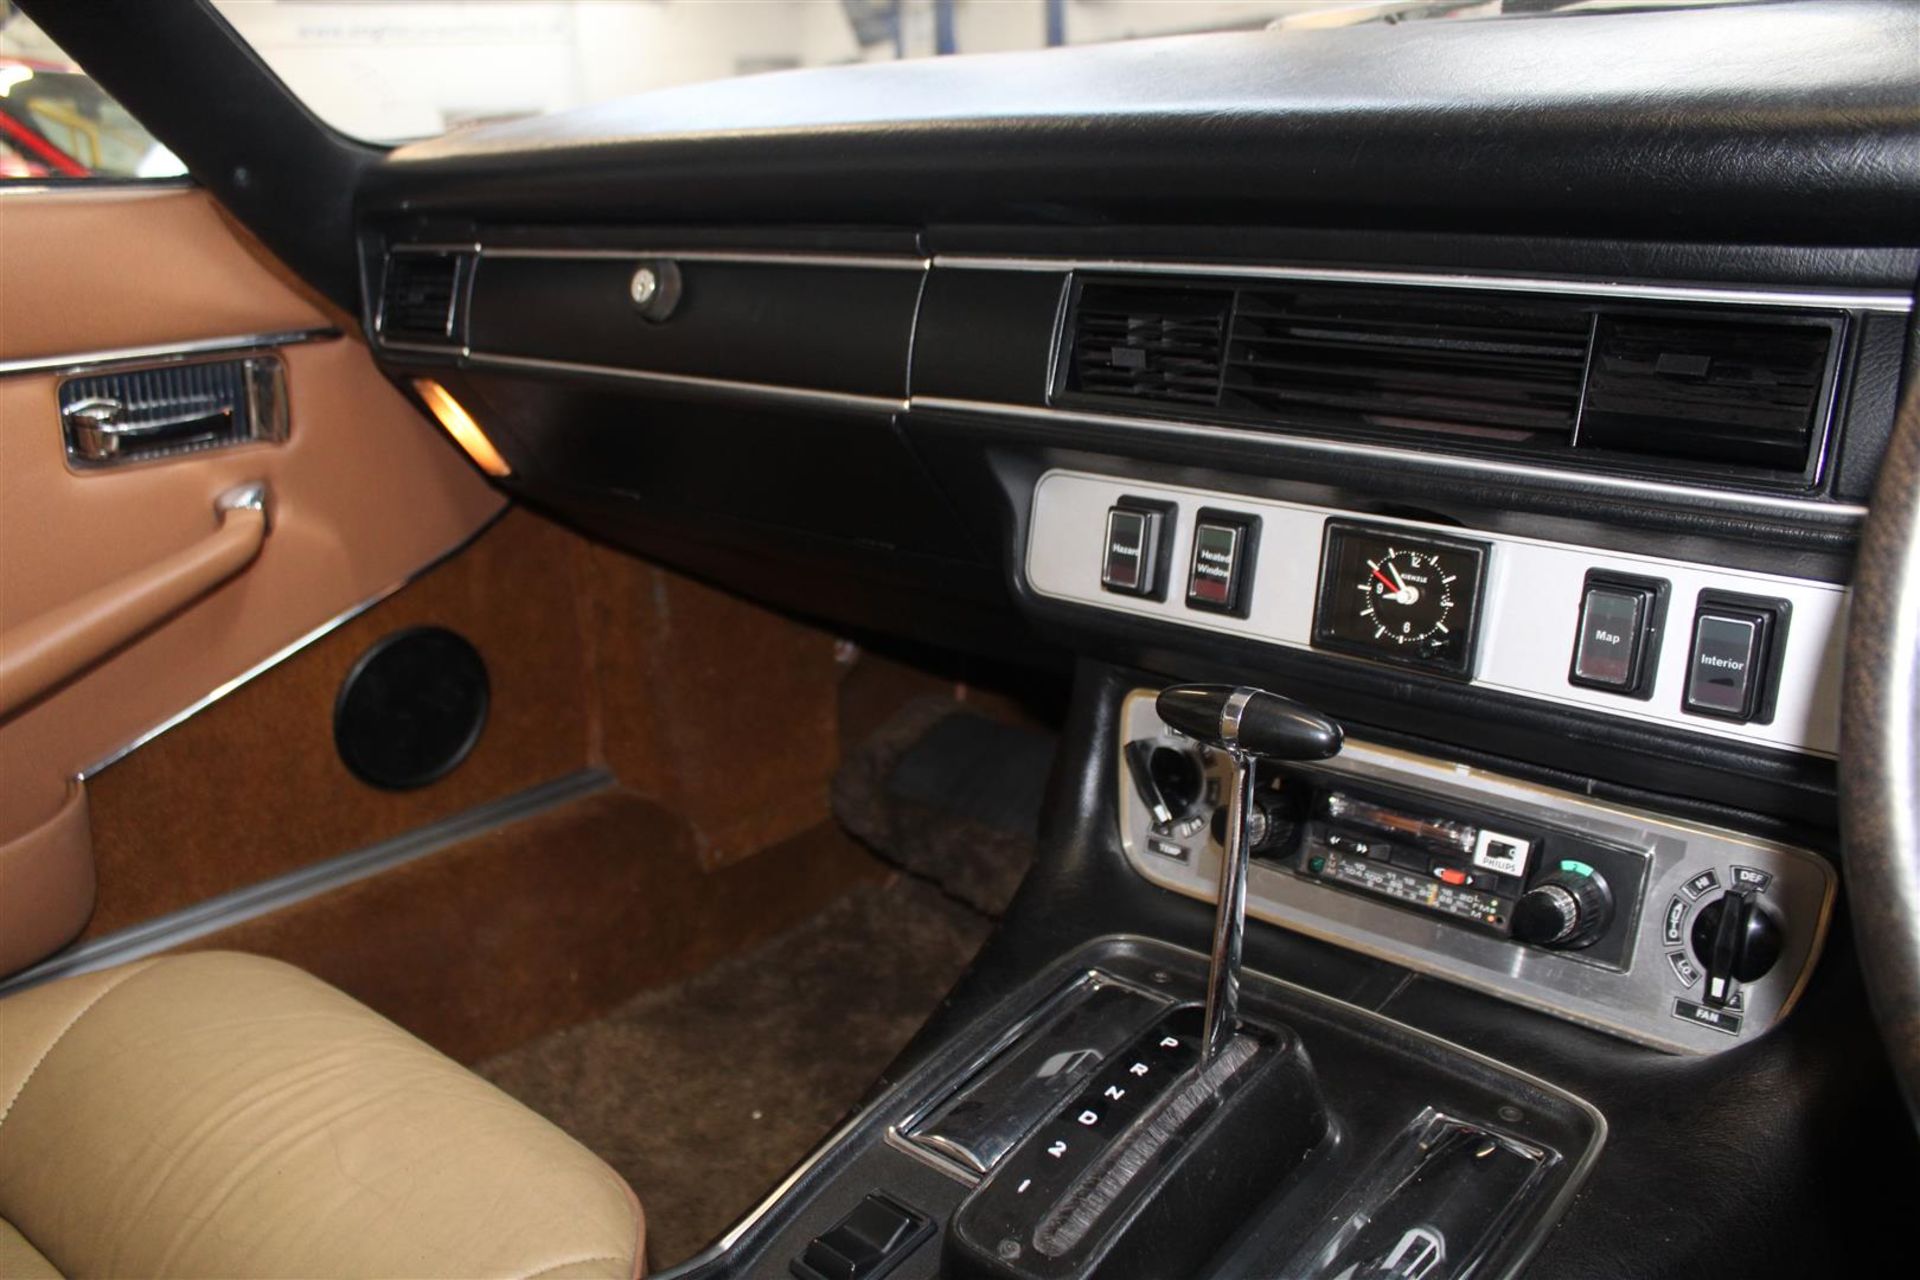 1976 Jaguar XJ-S 5.3 V12 Coupe Auto 29,030 miles from new - Image 10 of 23